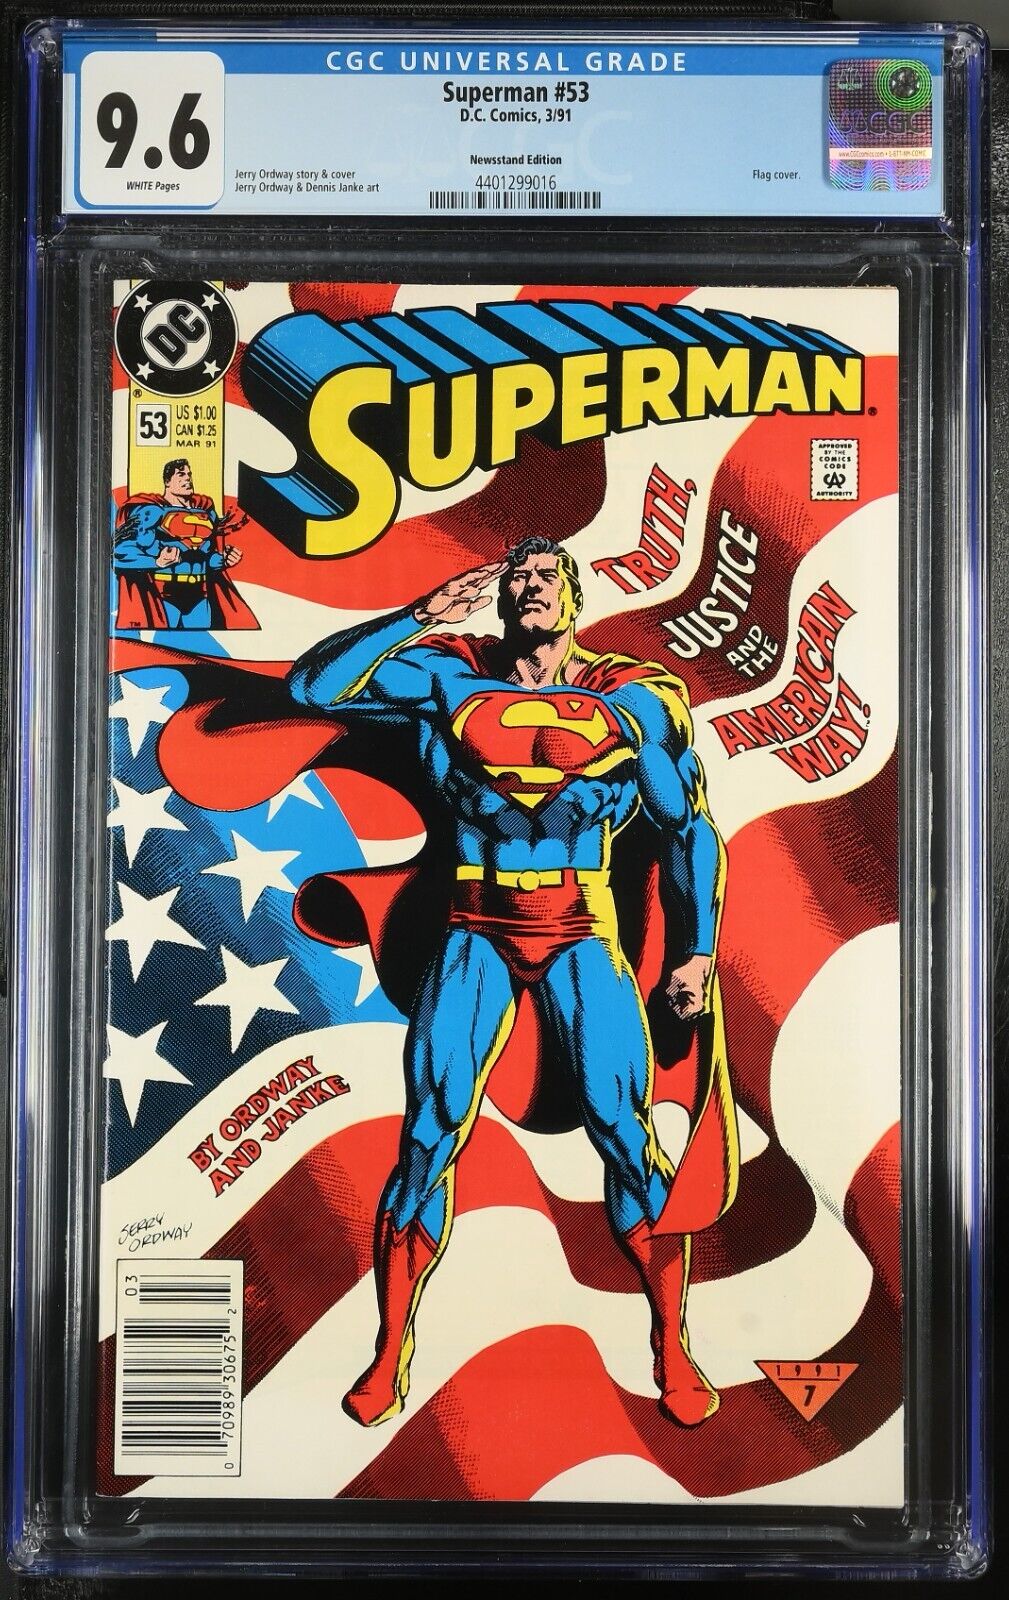 SUPERMAN #53 CGC 9.6, 1991, NEWSSTAND EDITION, CLASSIC FLAG COVER